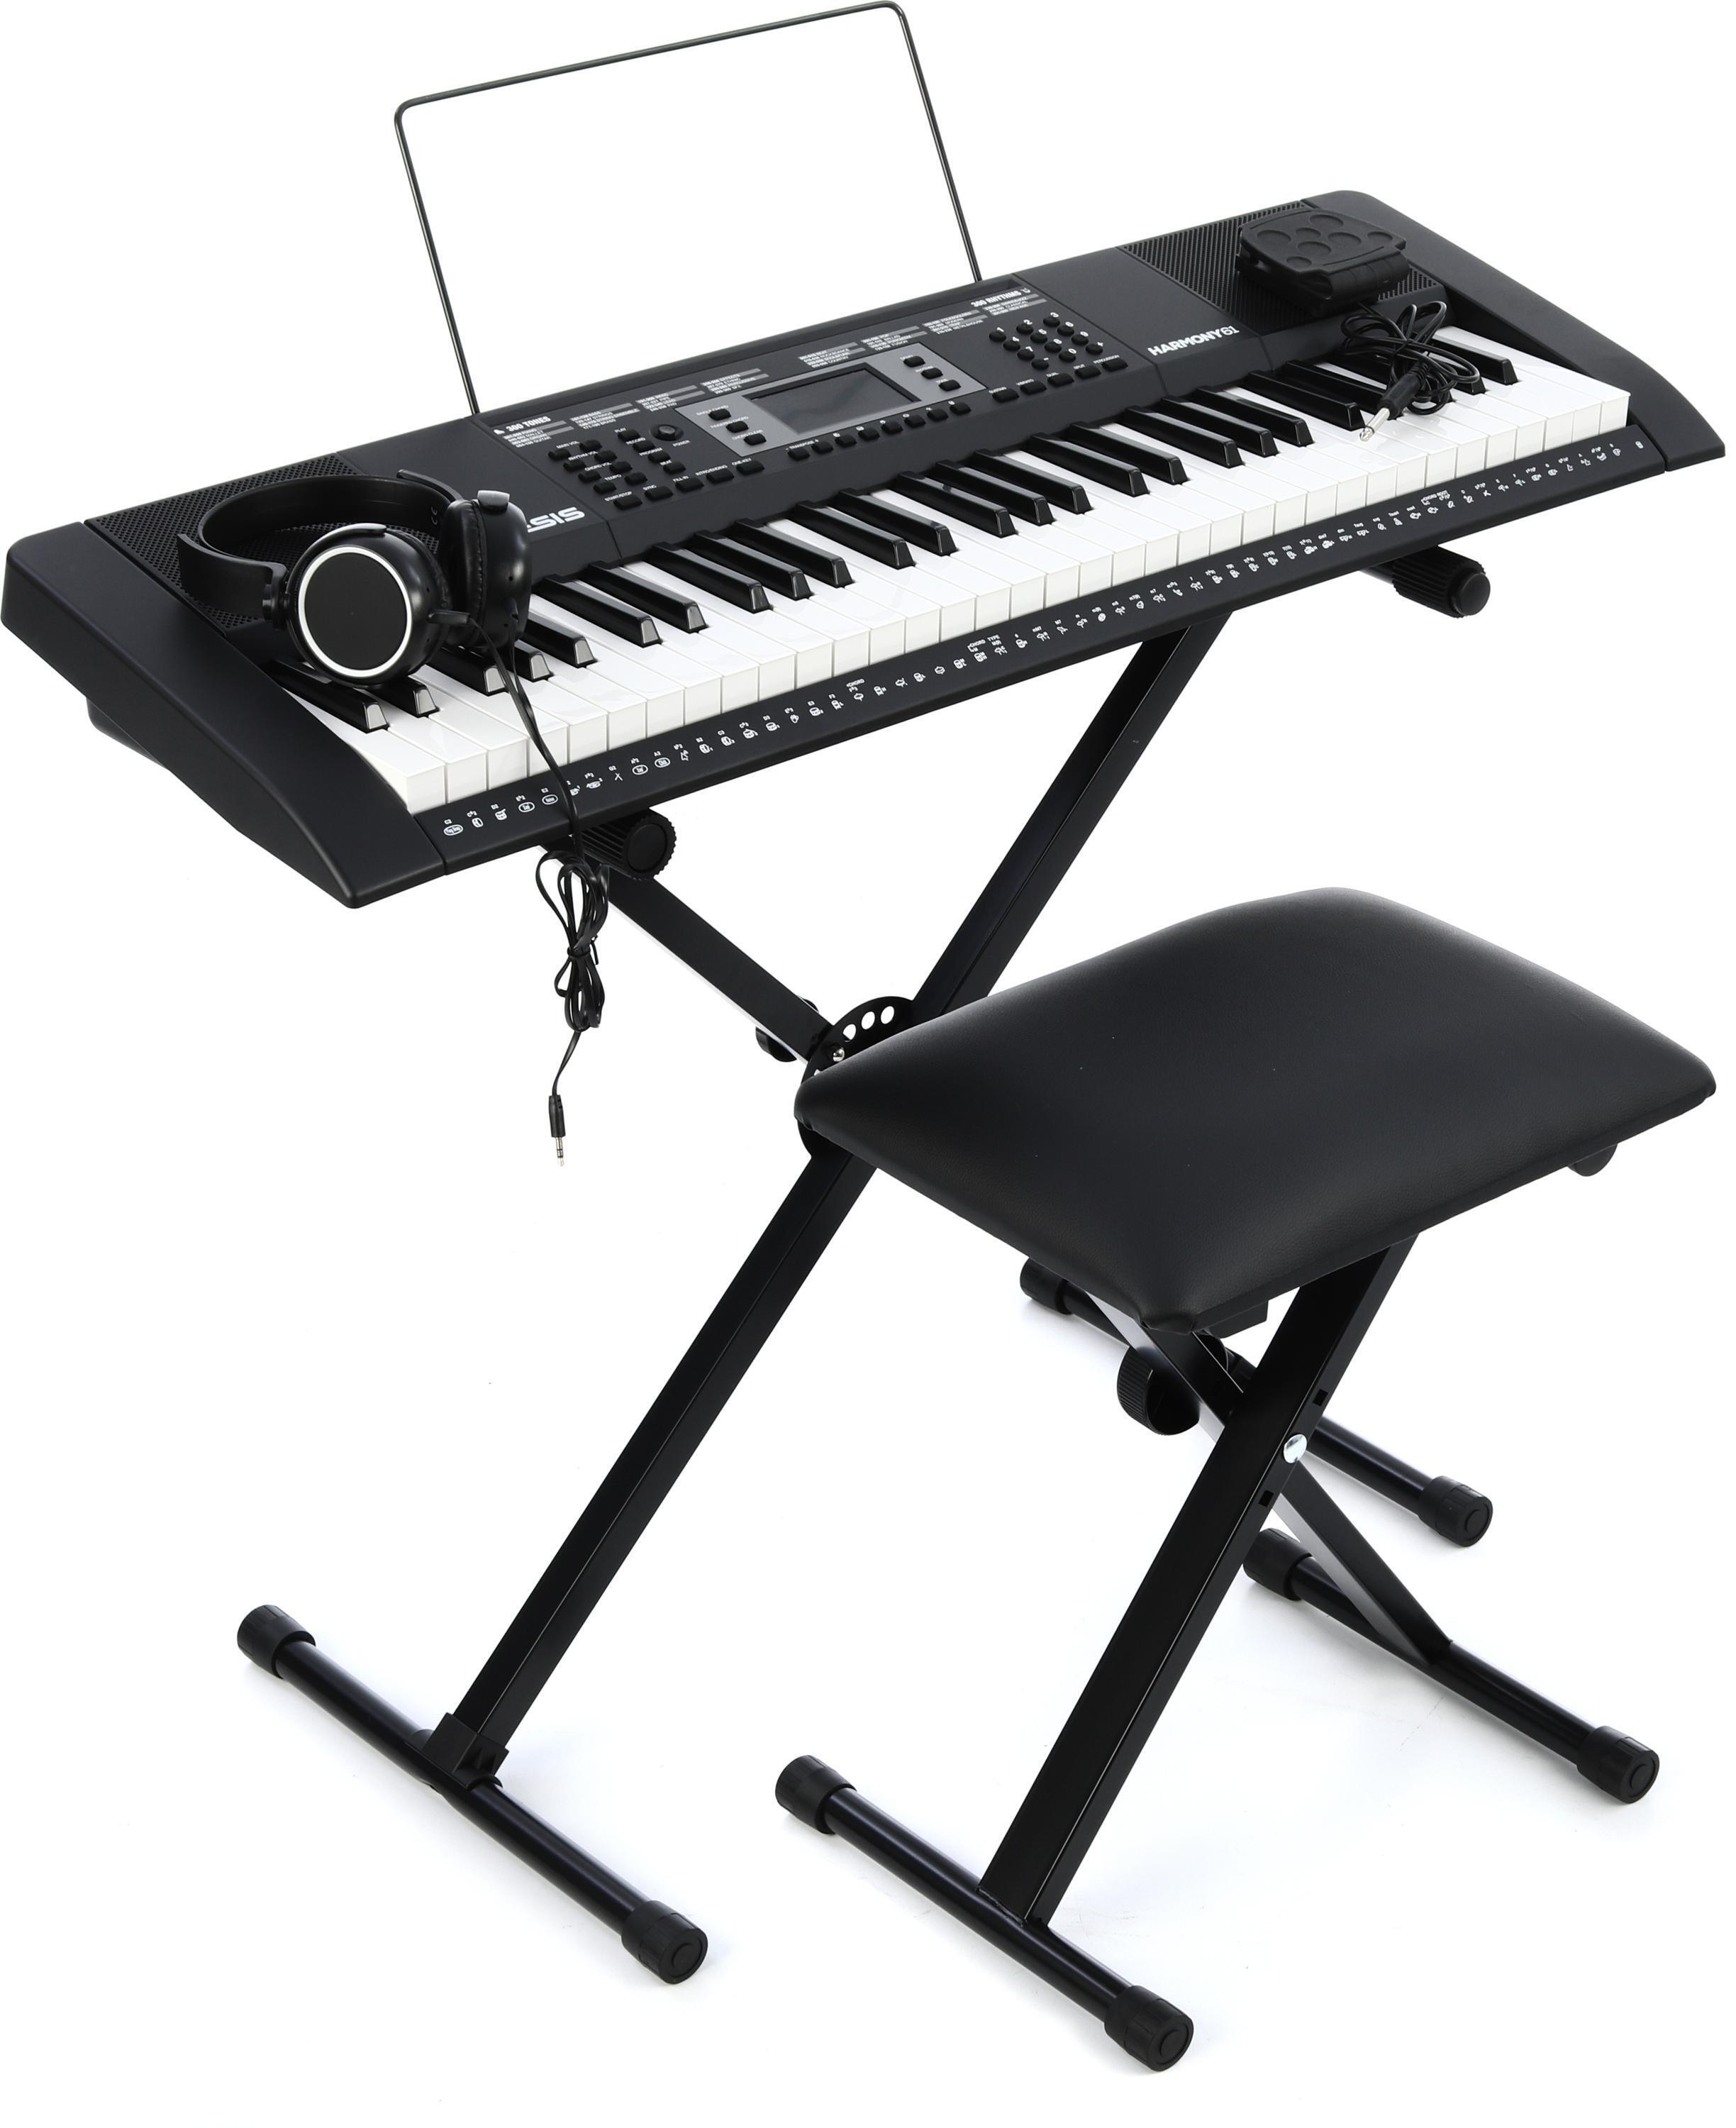 Clavier 61 touches ALESIS HARMONY 61 MKIII+Stand+Banquette+Casque+